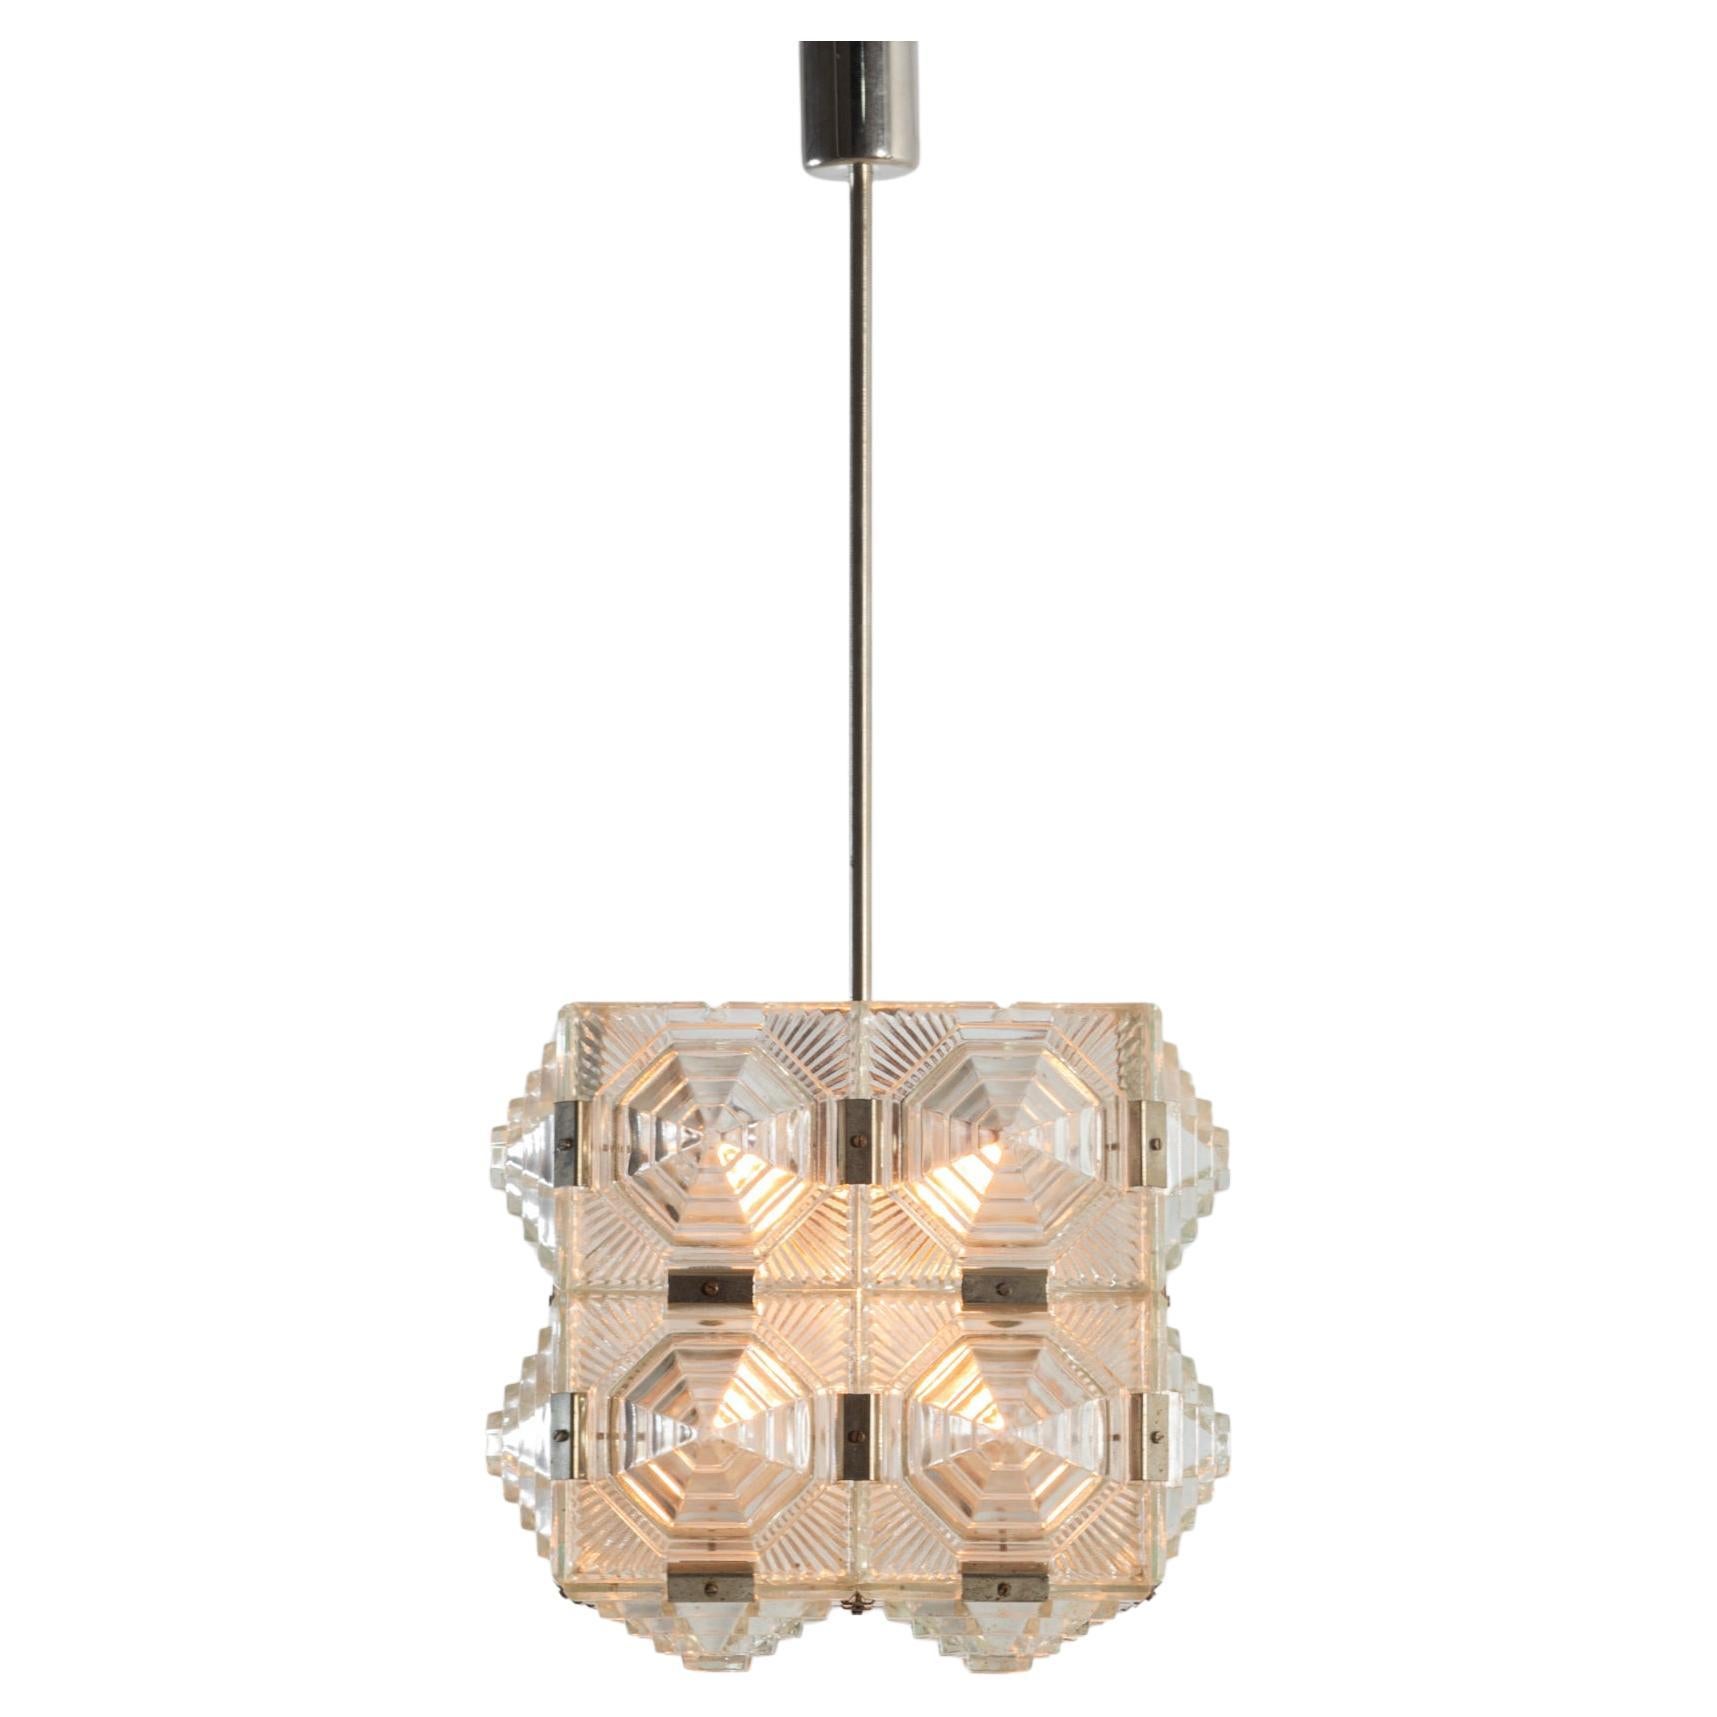 1960s Czech Metal and Glass Pendant Lamp